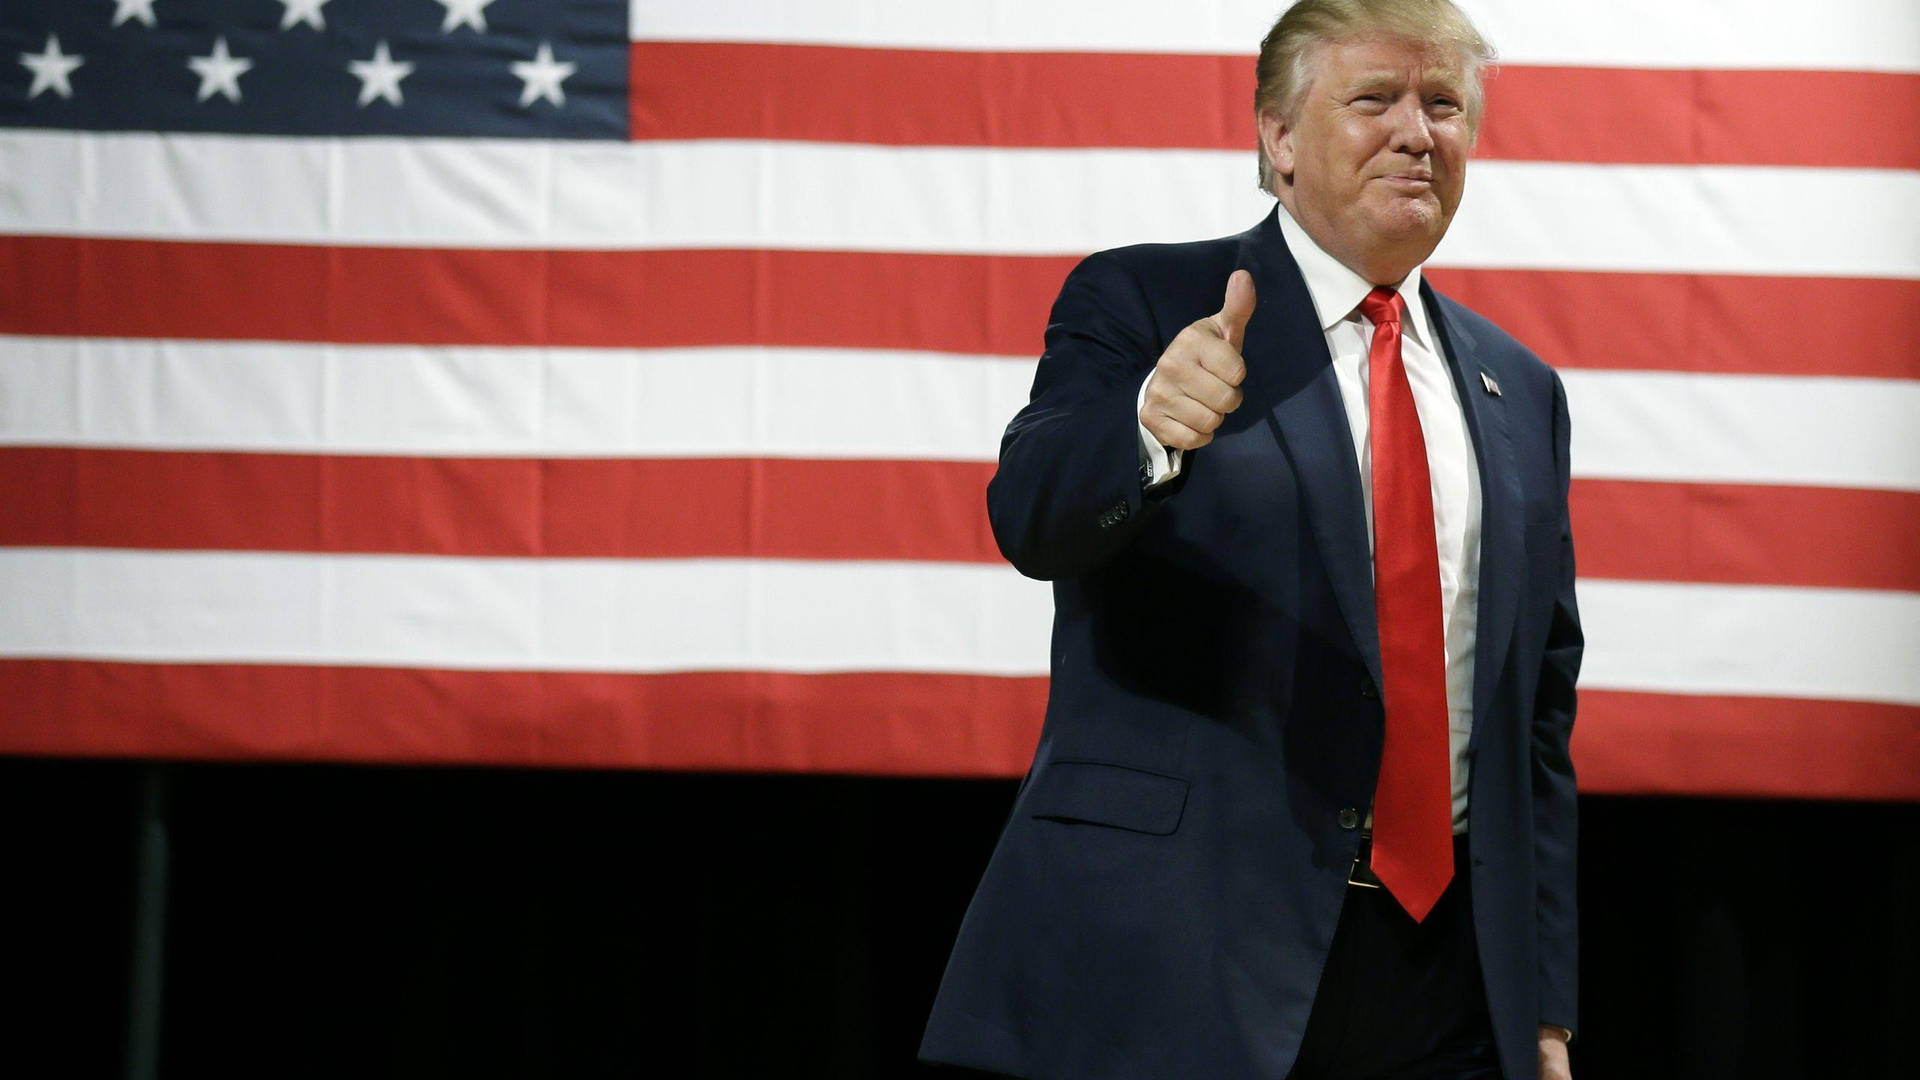 Donald Trump confidently raises his thumb in approval at the American flag. Wallpaper